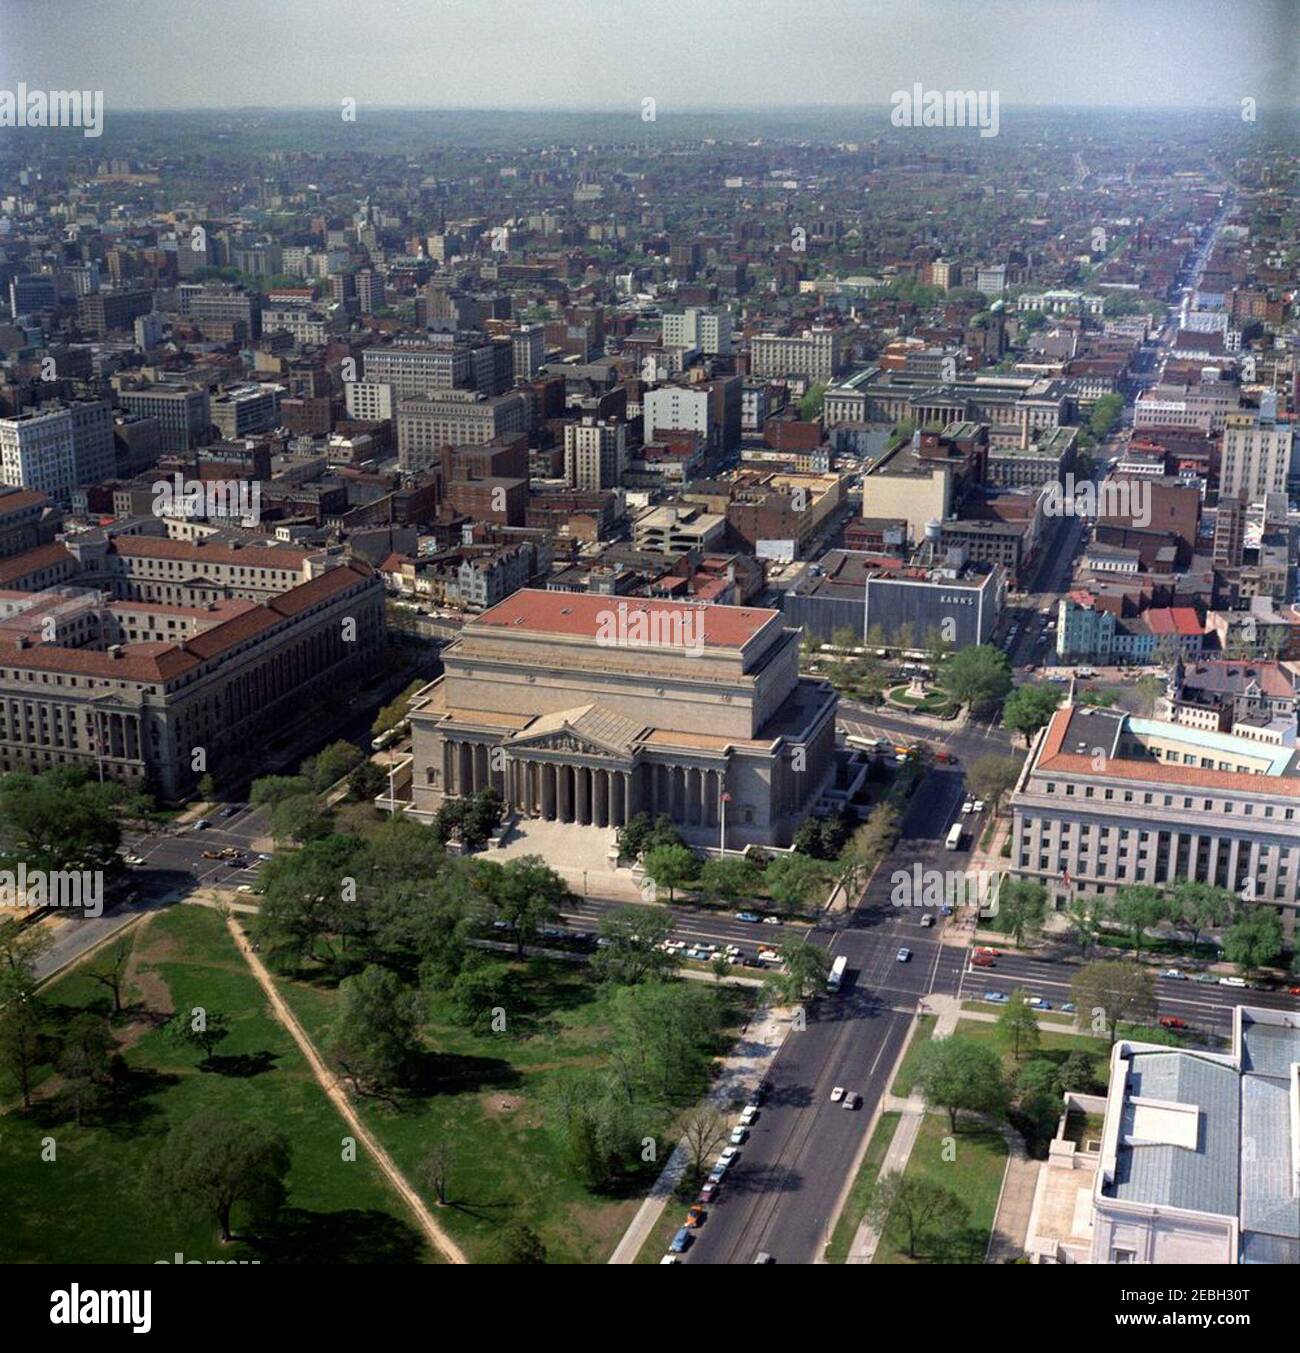 Aerial views of Washington, D.C.. Aerial view of Washington, D.C., with the National Archives Building in center and the Department of Justice building at left (on edge of frame). Stock Photo